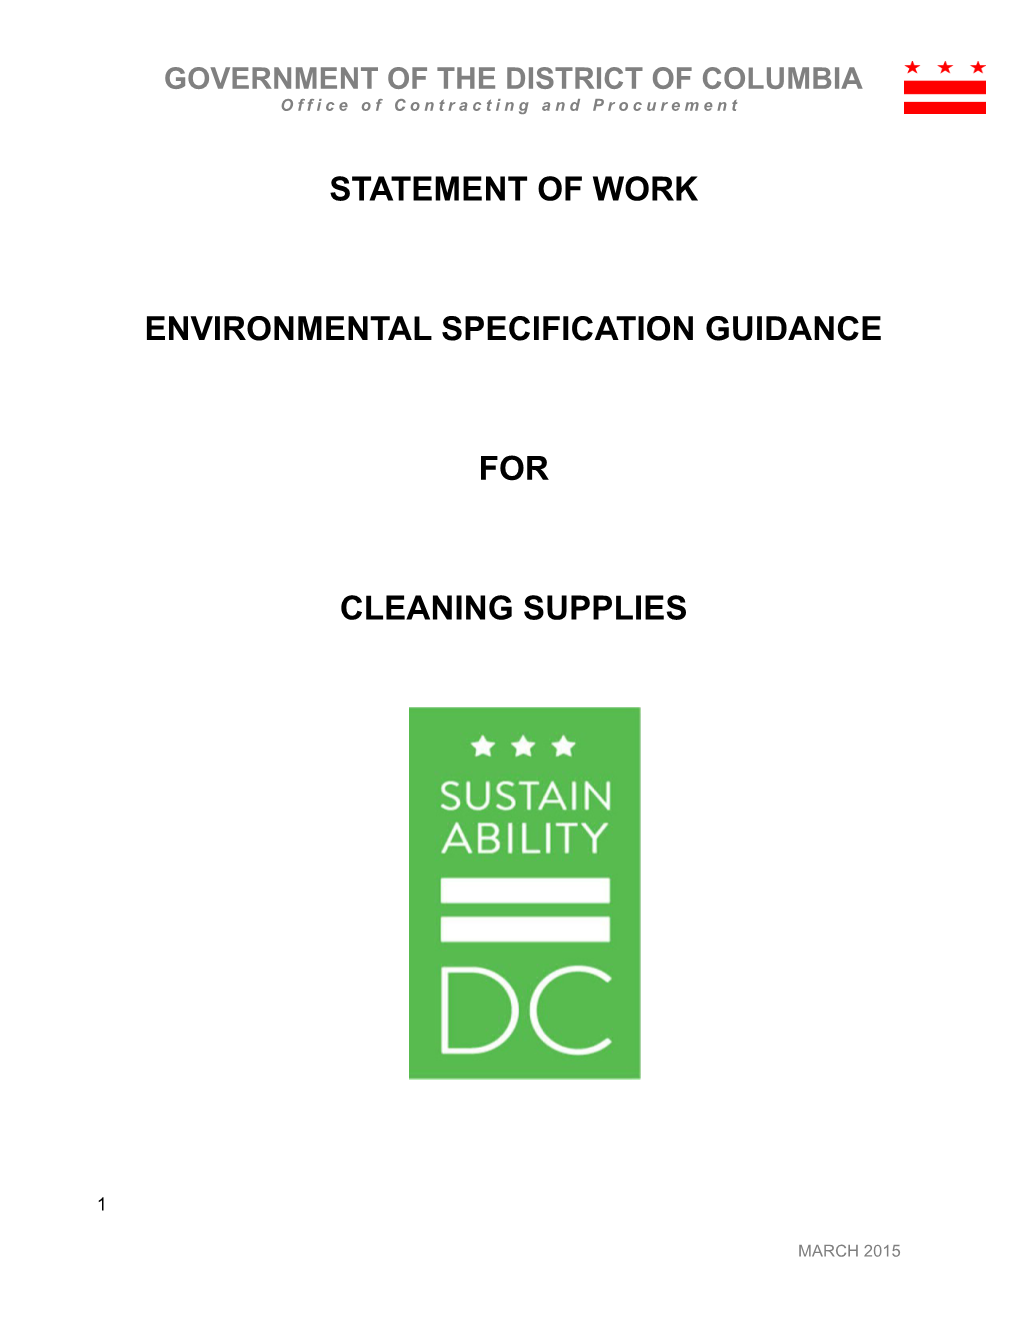 FY 2013 Sustainable Purchasing Report